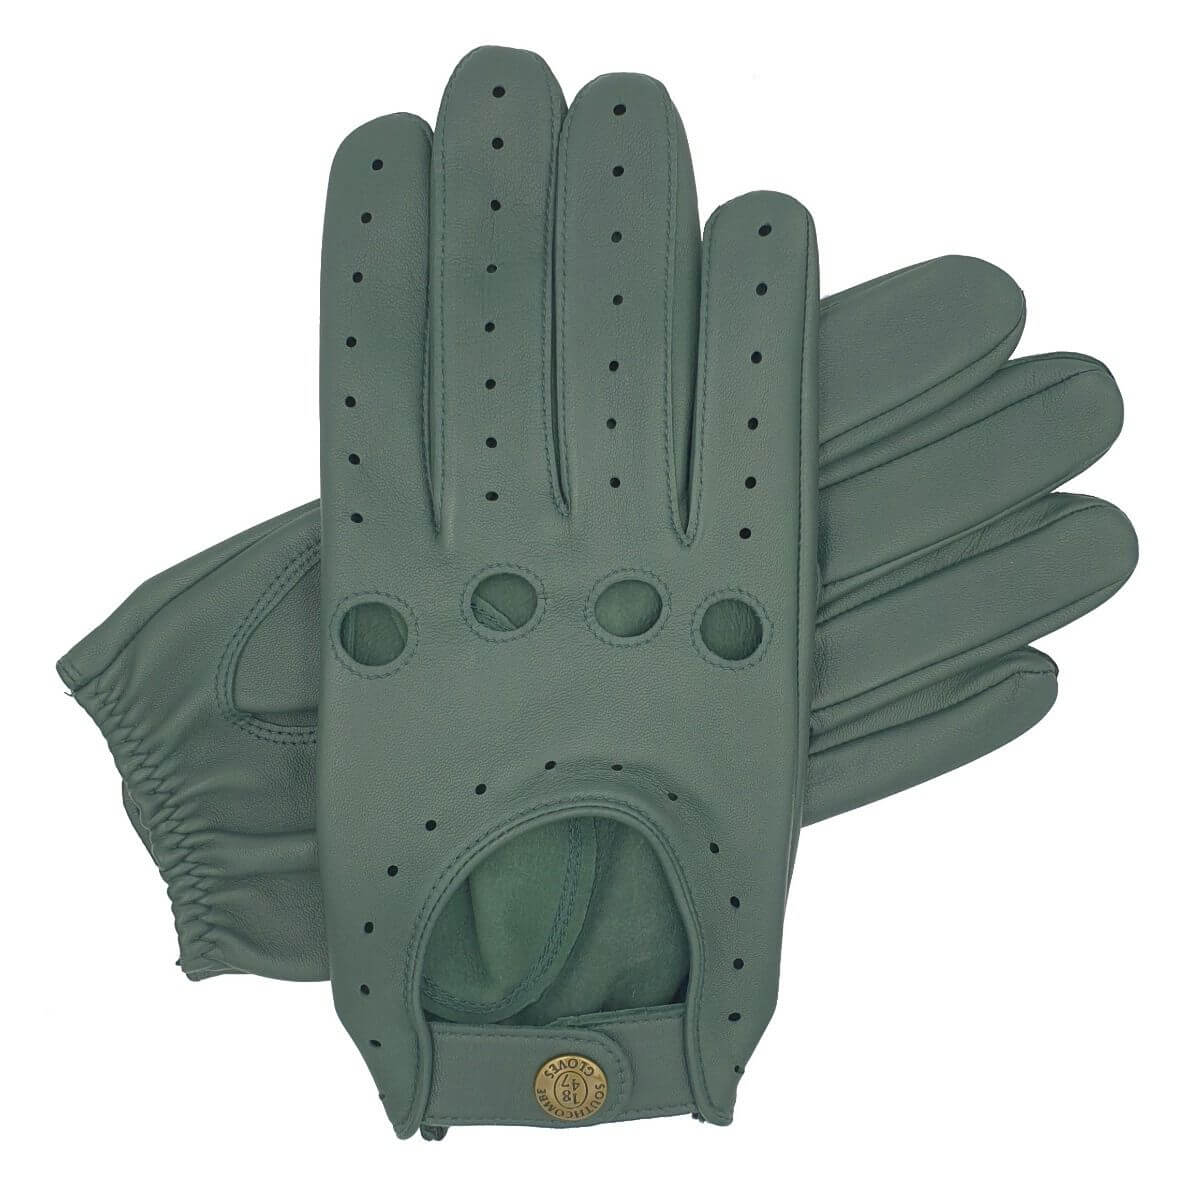 Southcombe Cooper - Men's Unlined Leather Driving Glove - Green